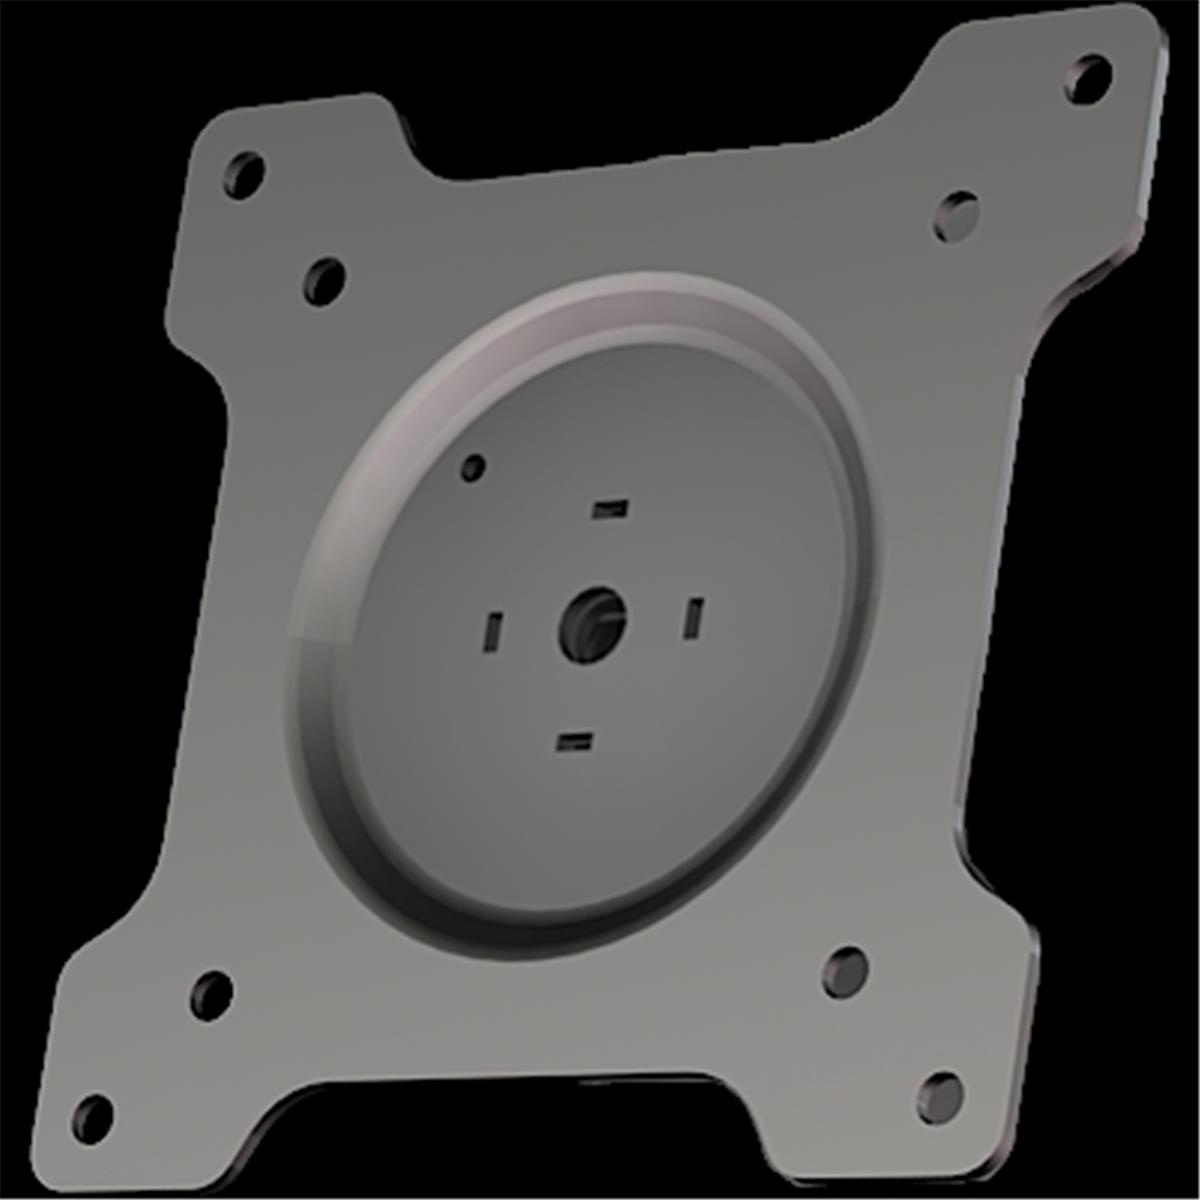 Ad75100 75-100 Mm Adapter Plate